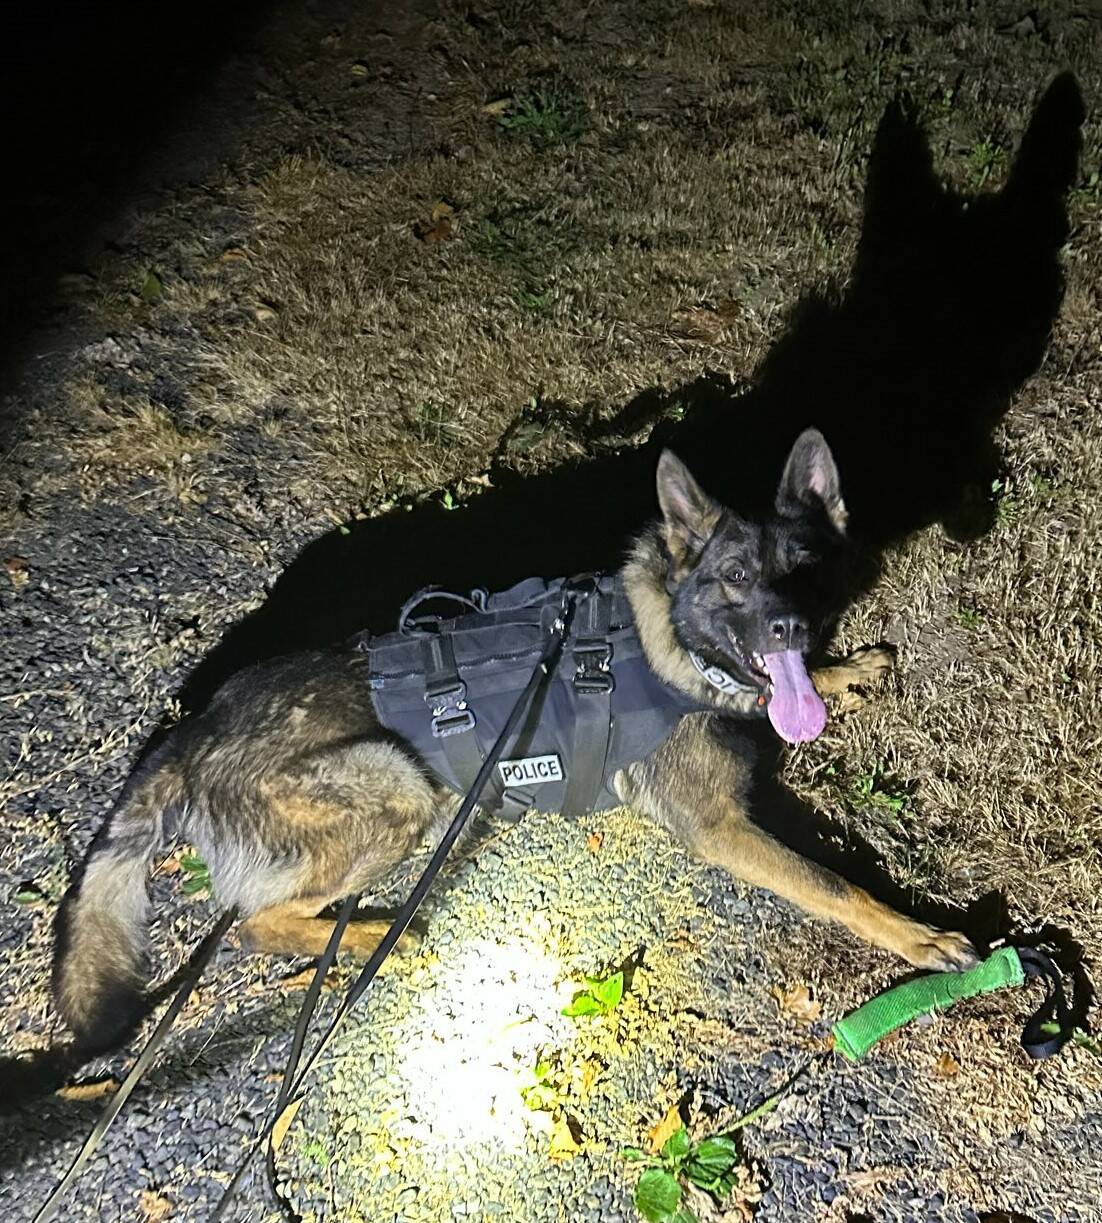 Aberdeen police dog Mac assisted police in locating a burglary suspect early Sunday morning. (Courtesy photo / Aberdeen Police Department)